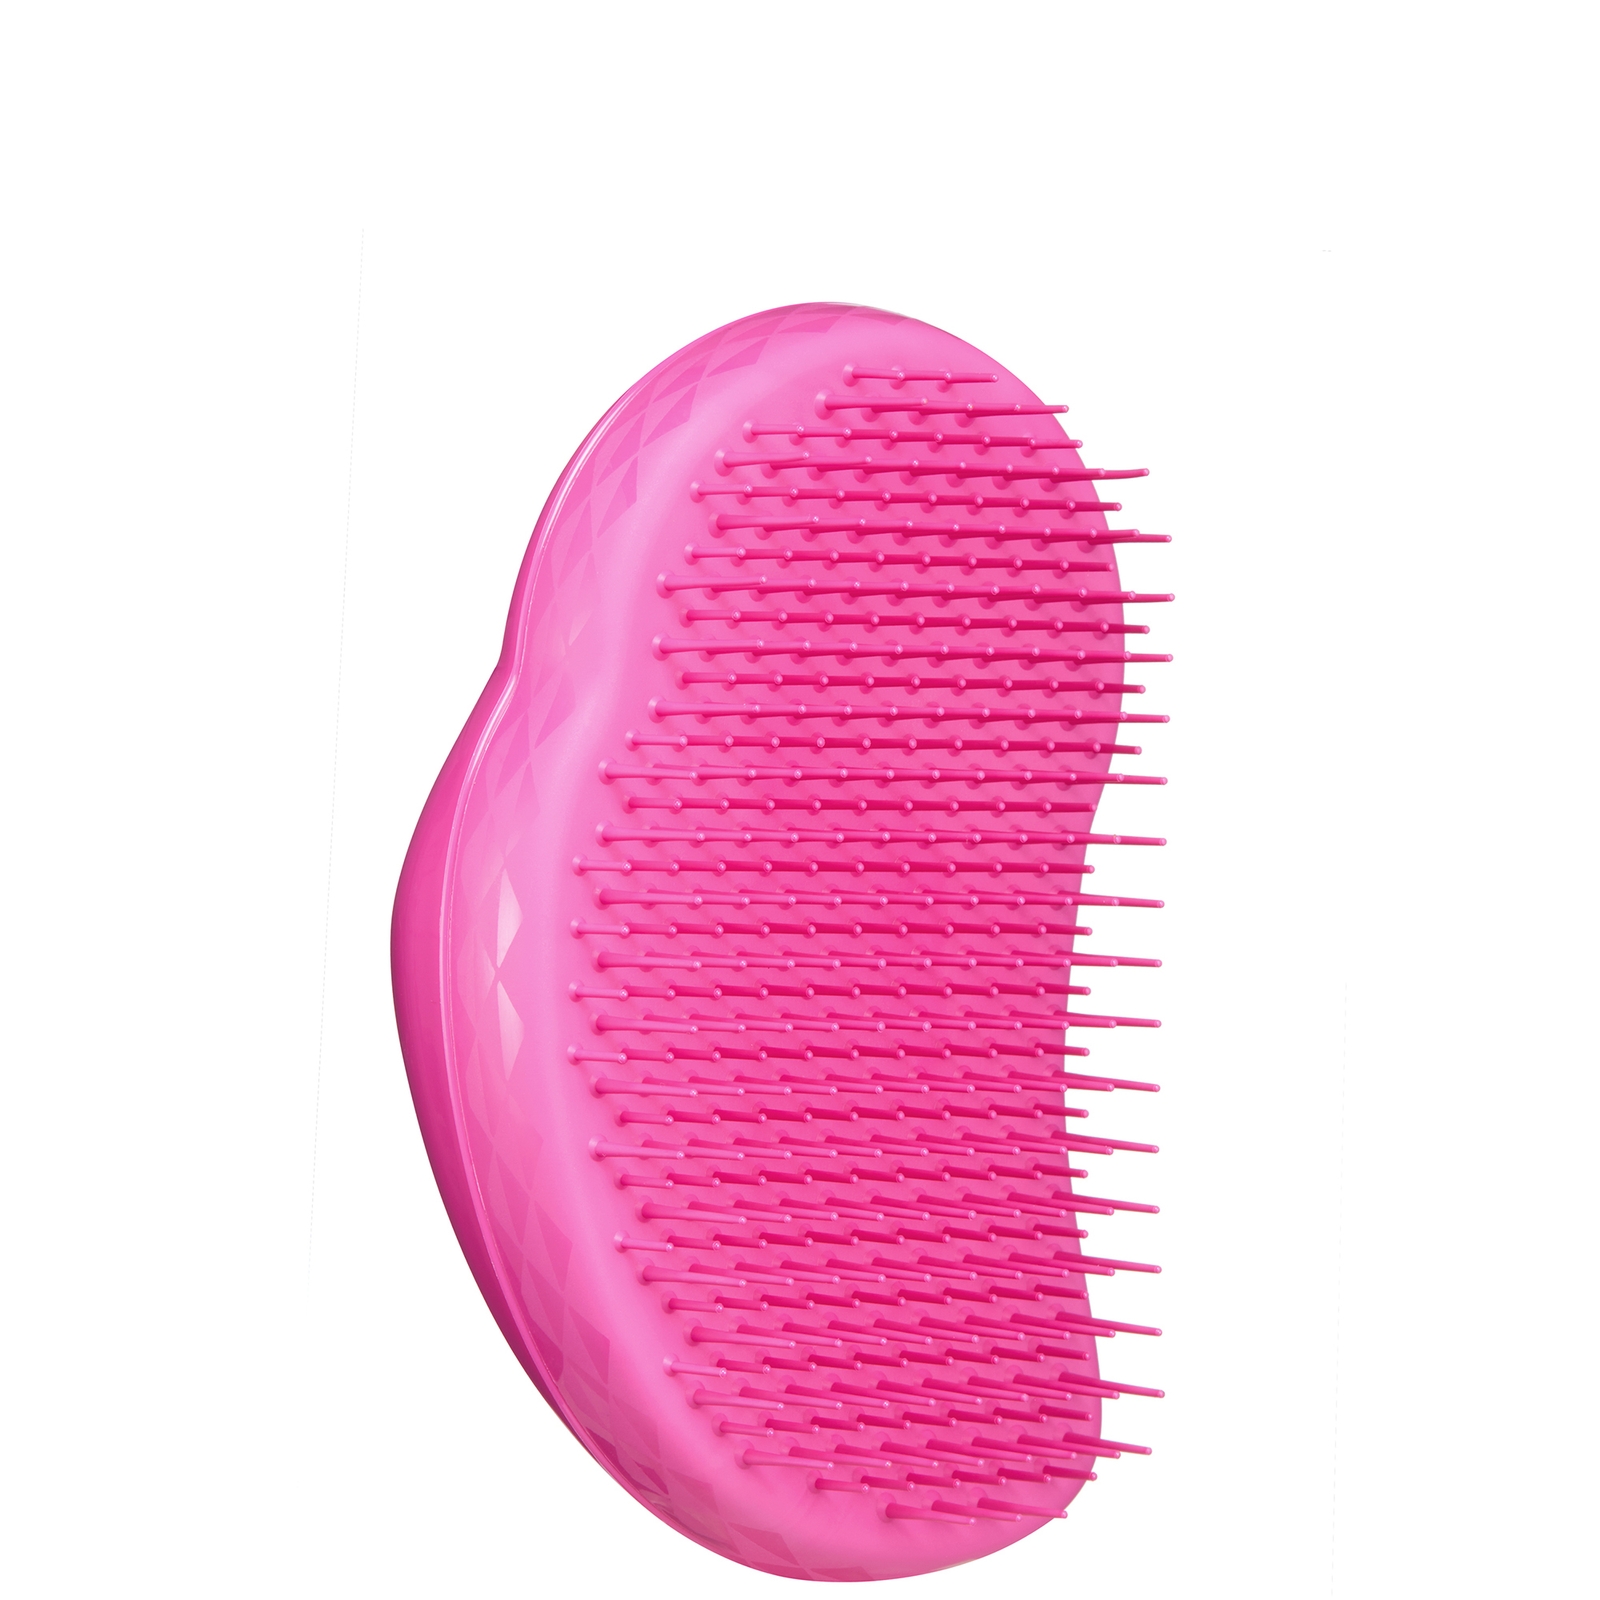 Image of Tangle Teezer The Original Fine and Fragile Brush - Berry Bright